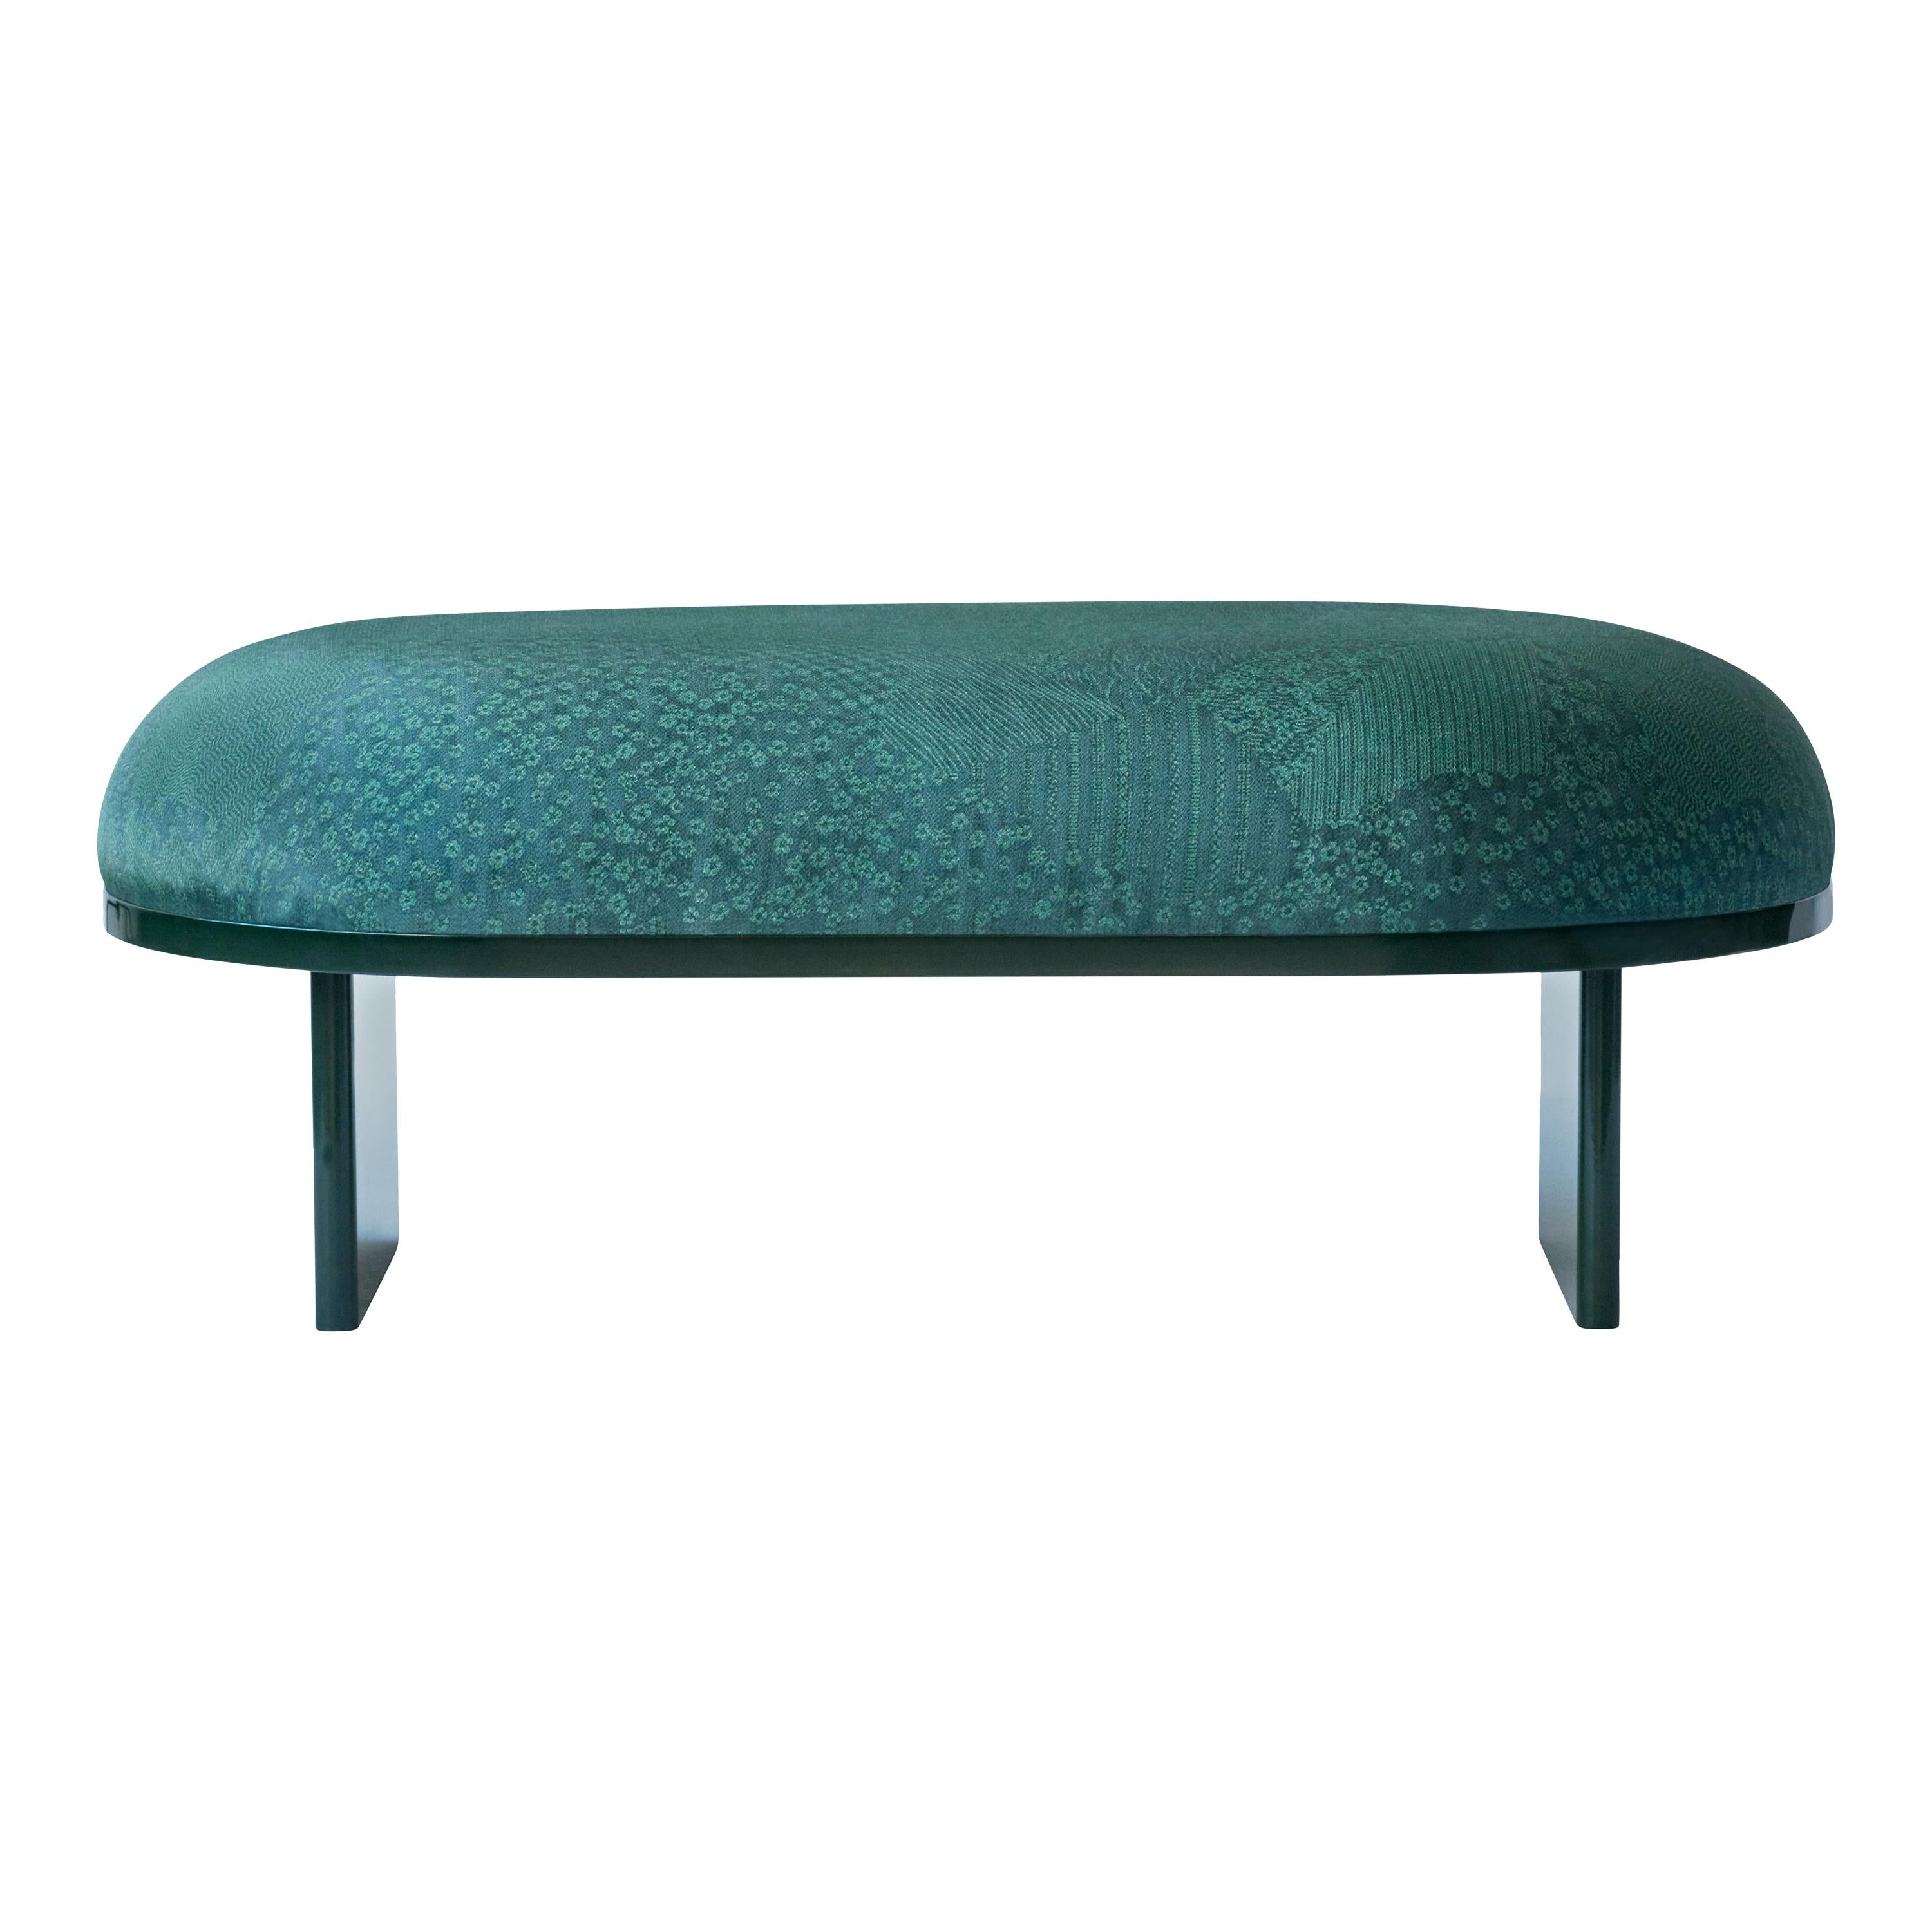 For Sale: Green (Cedar Green) Anza Small Upholstered Bench with Floating Cushion